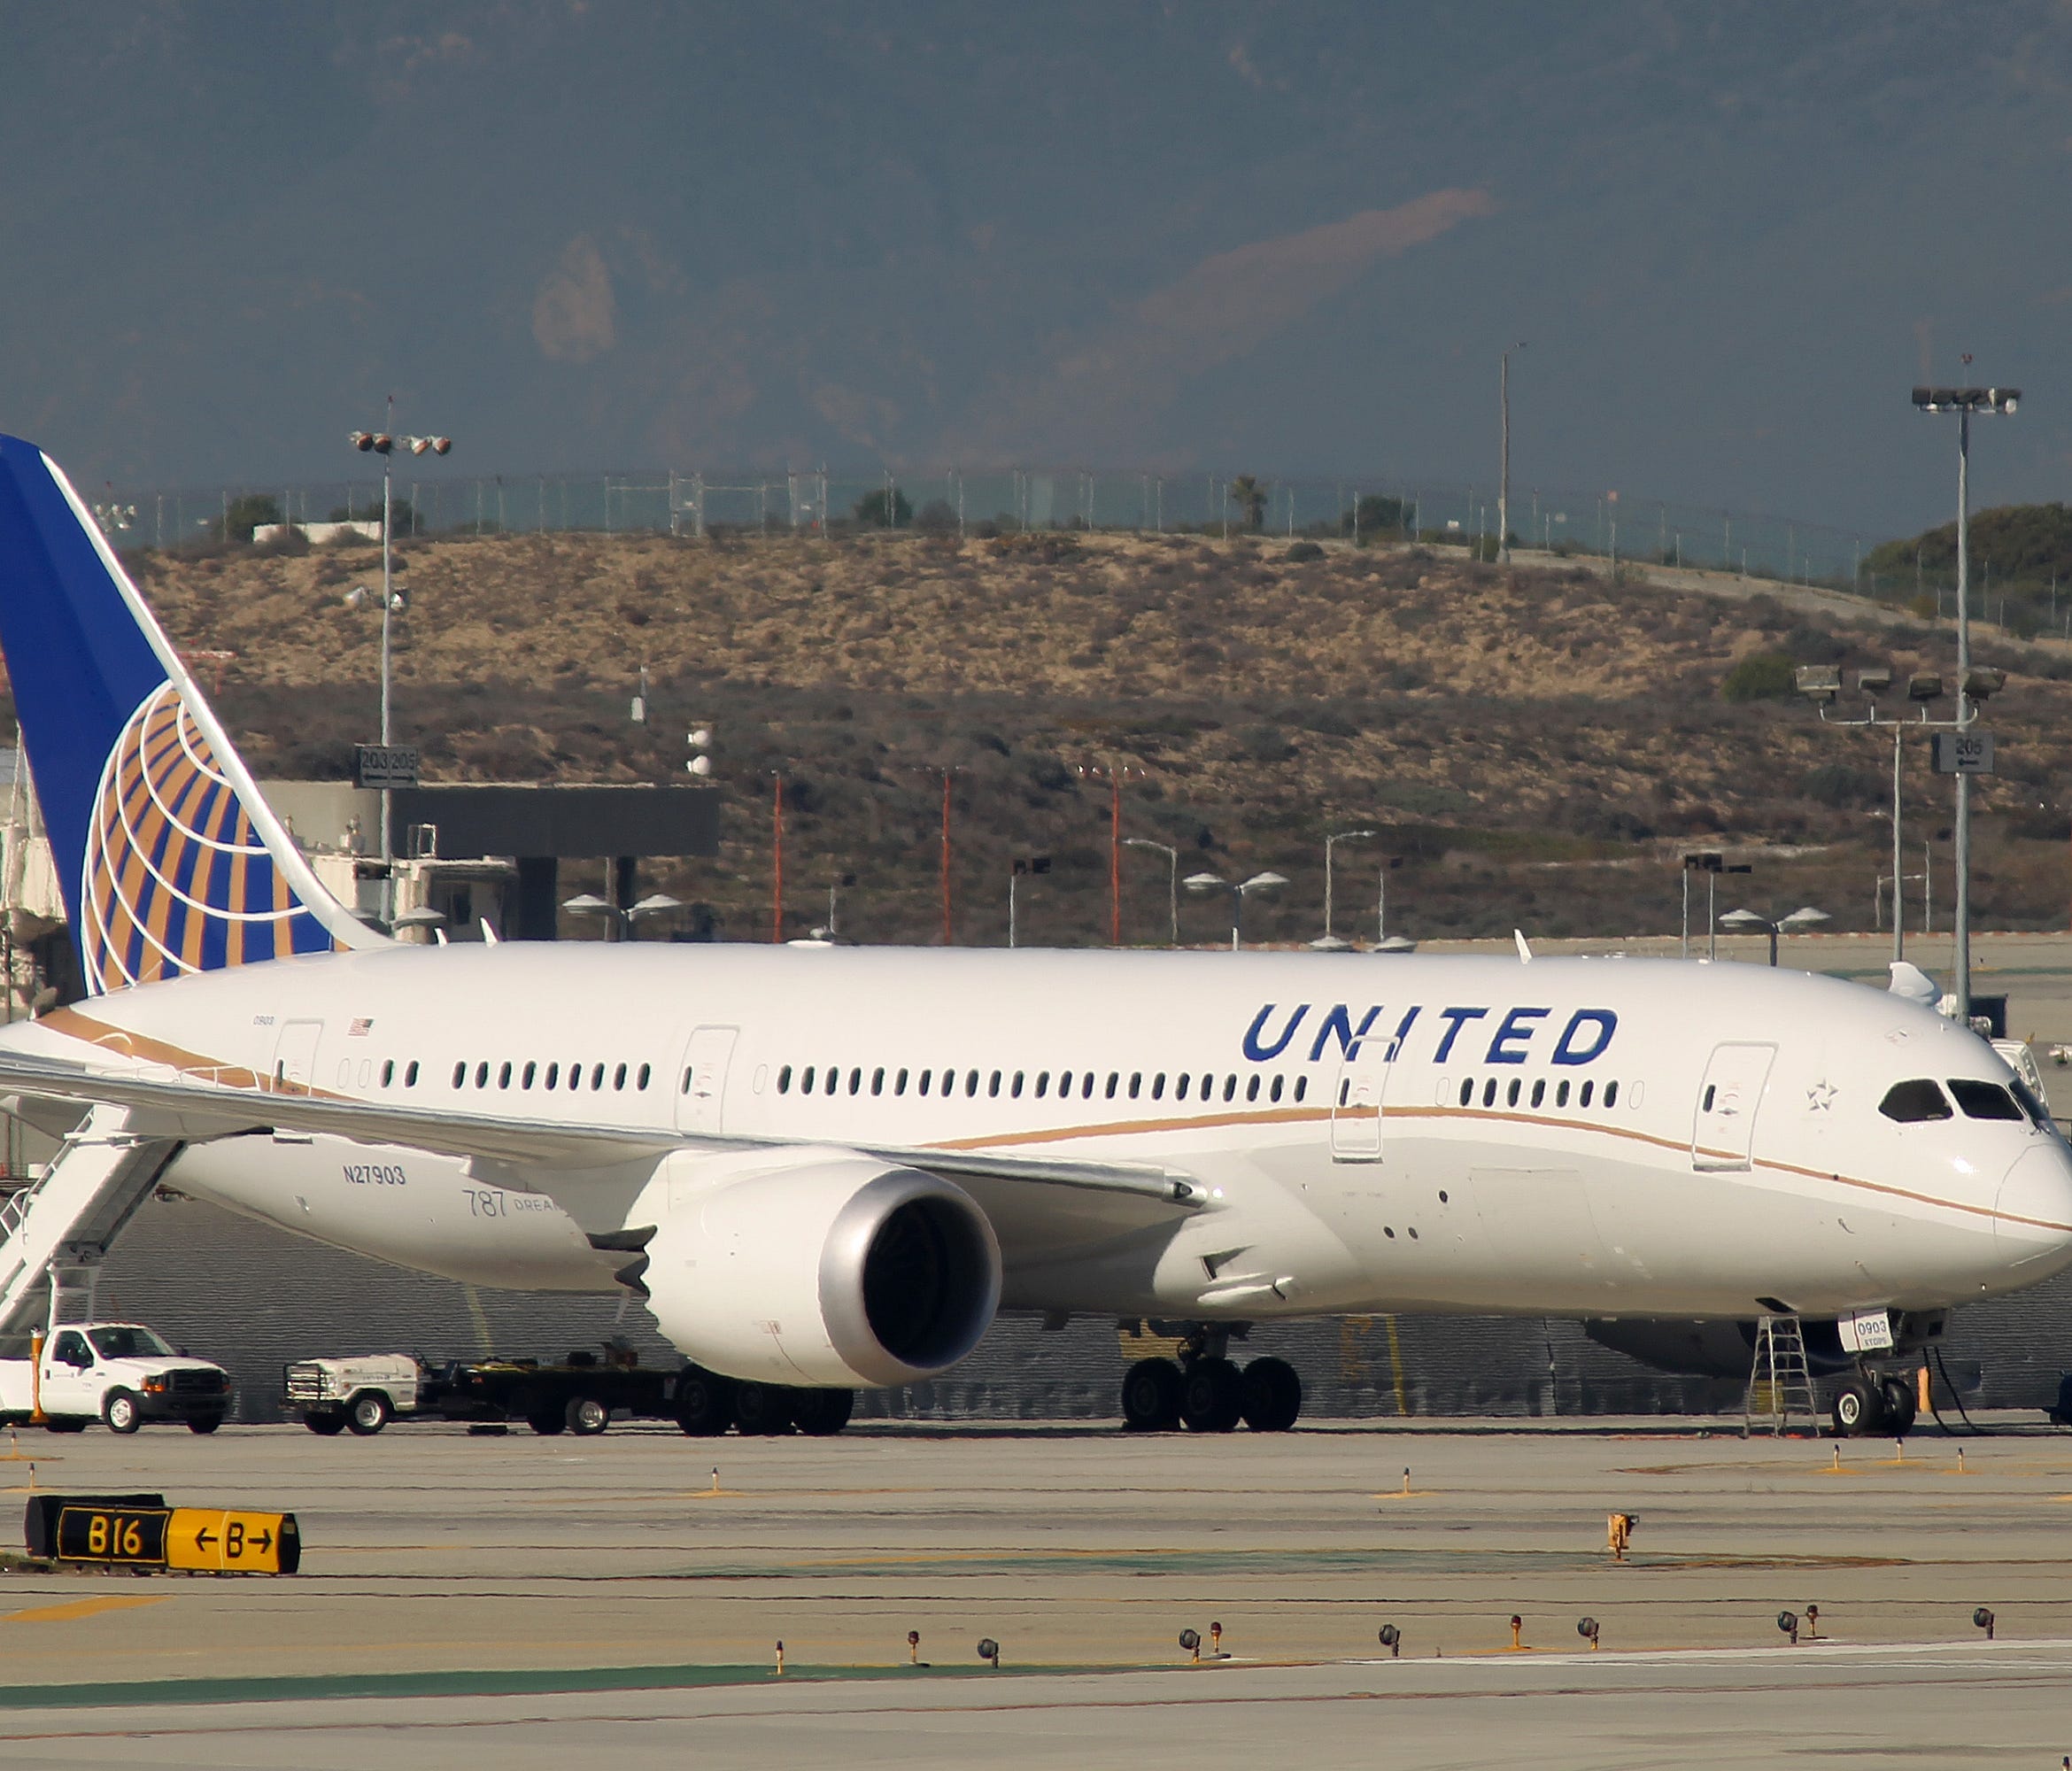 A Boeing 787 Dreamliner jet operated by United Airlines is shown parked at Los Angeles International Airport on Jan. 9, 2013. The FAA had grounded all U.S.-registered Boeing 787 jets for the repair of batteries believed to be linked to a fire risk.